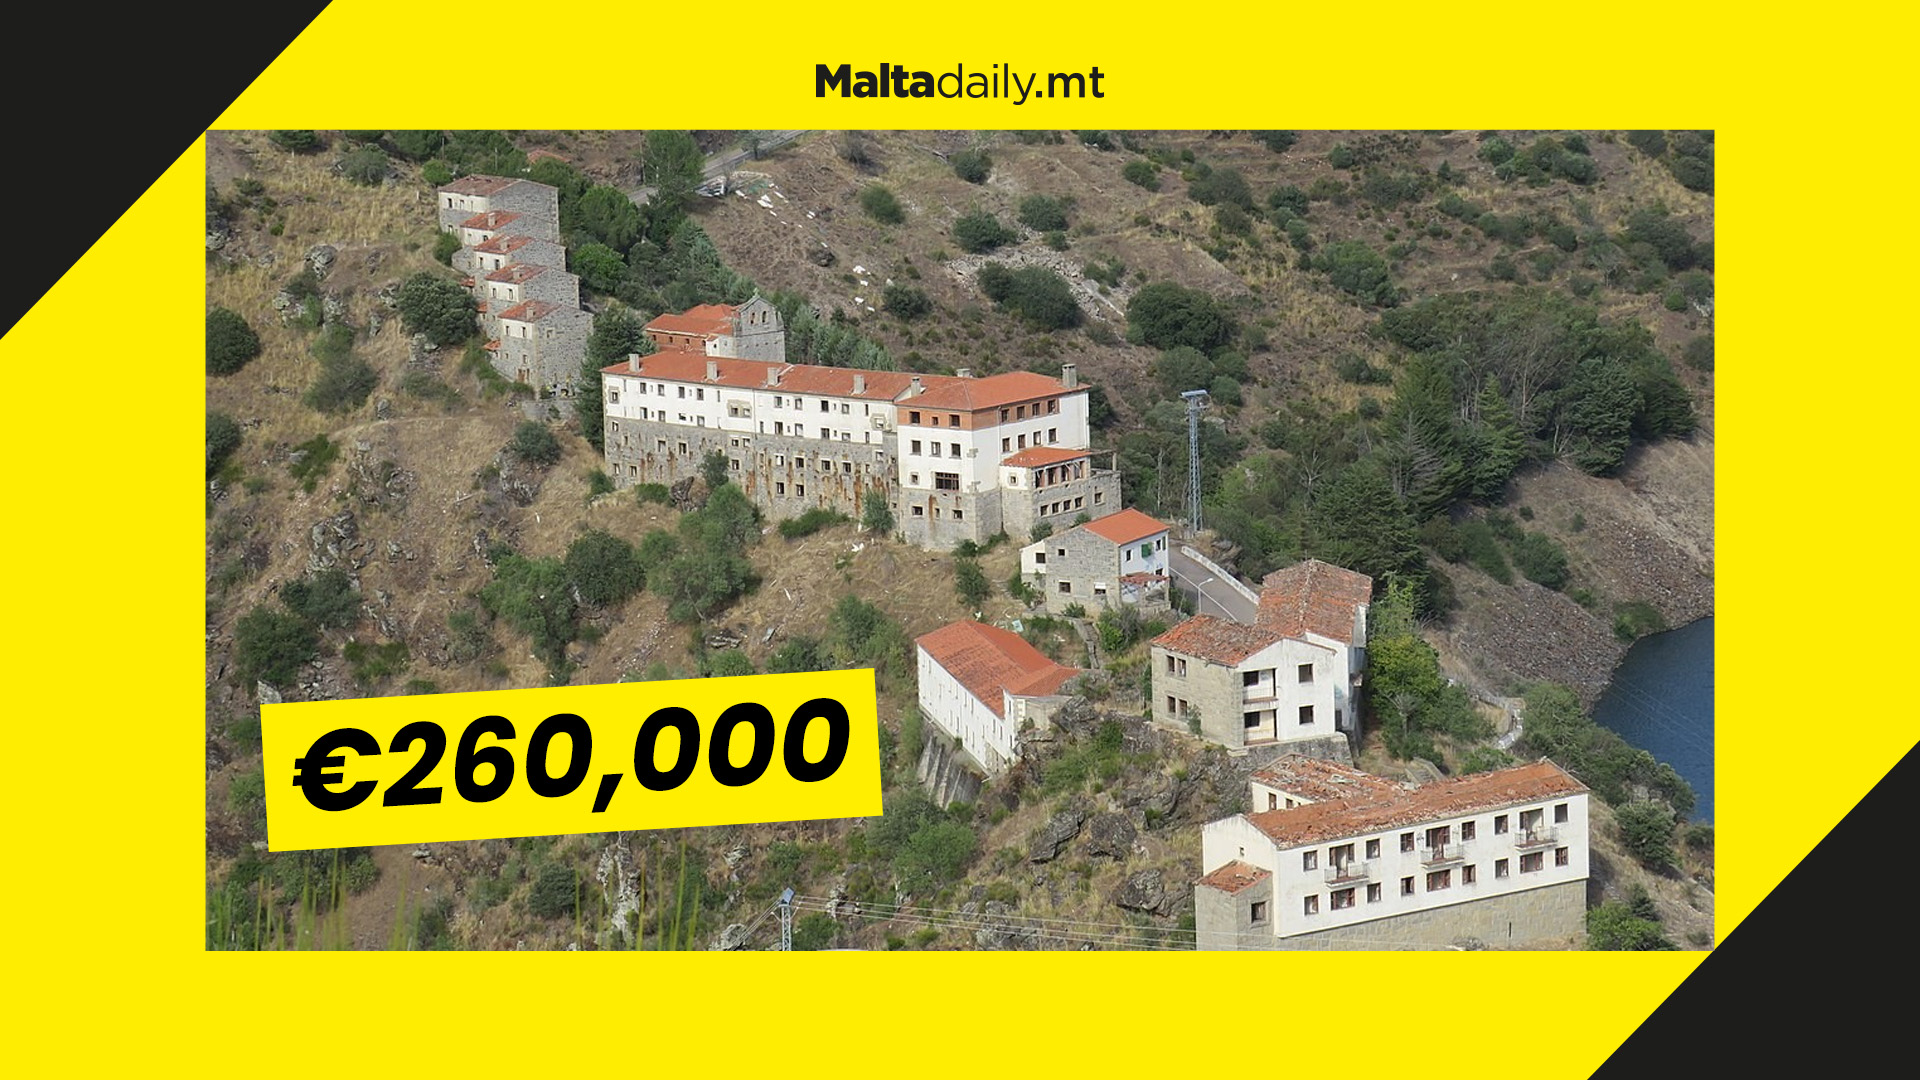 This entire village in Spain is being sold for €260,000